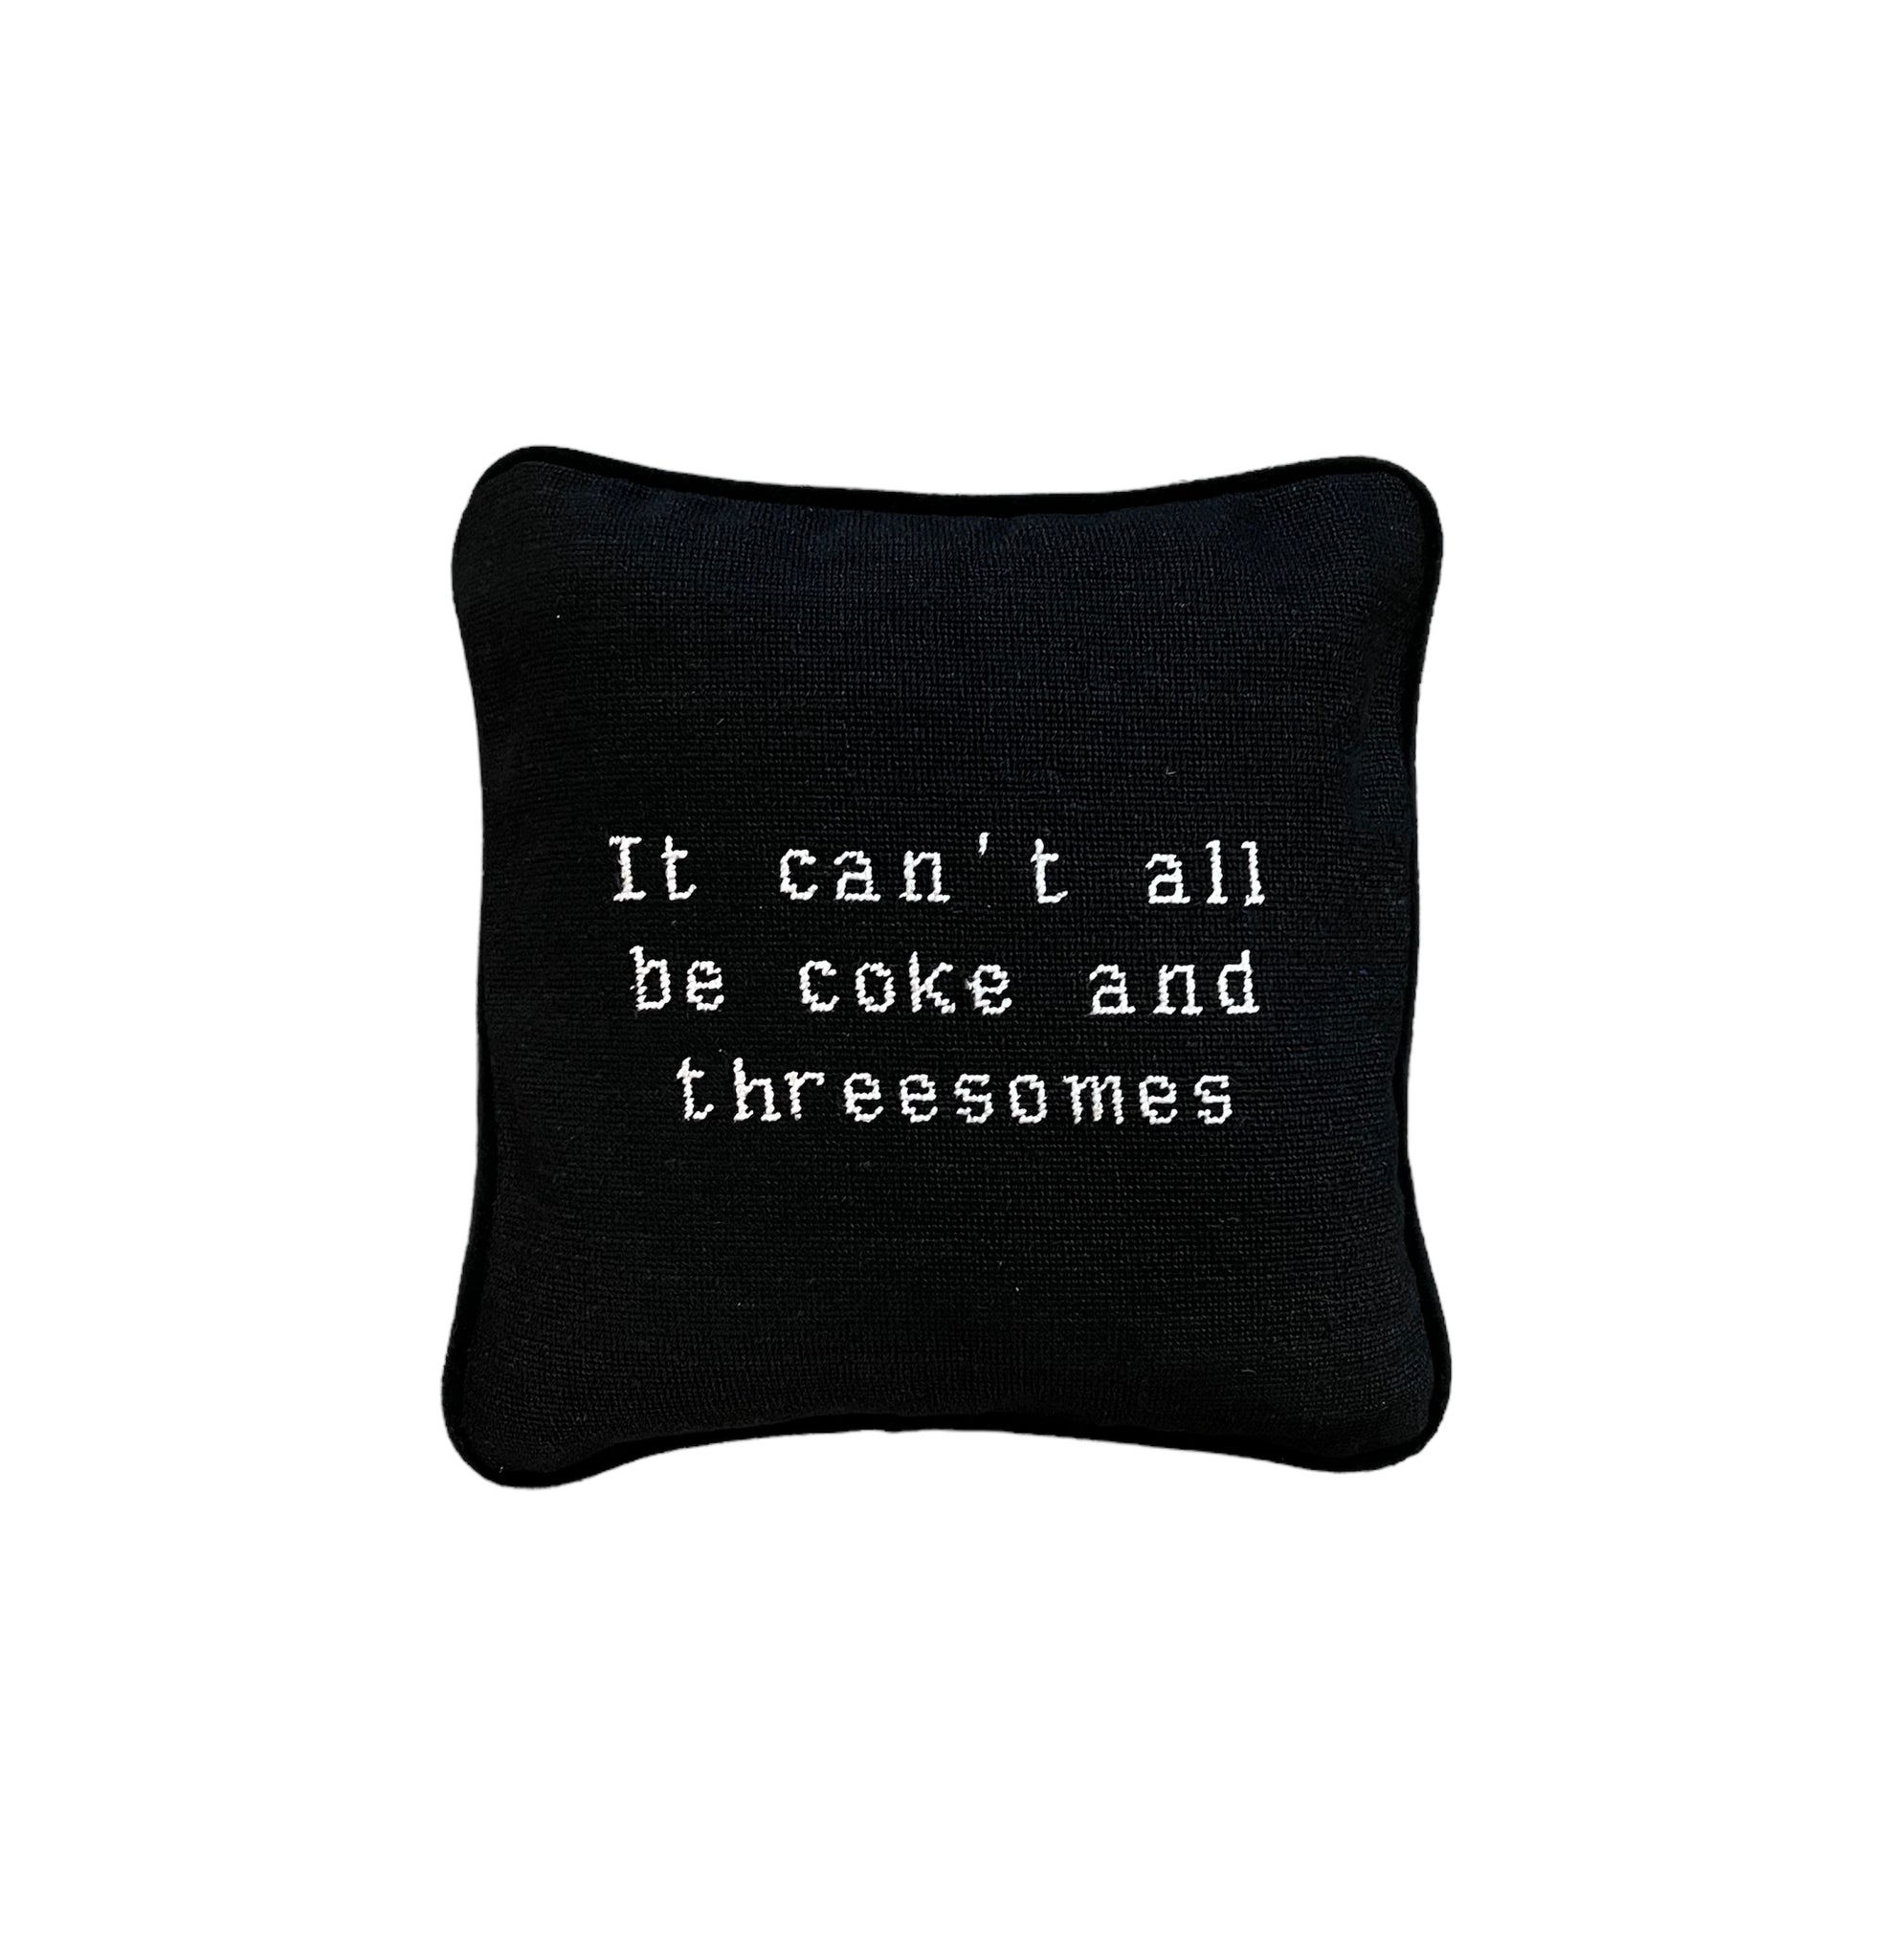 CAN'T ALL BE COKE BLACK PILLOW